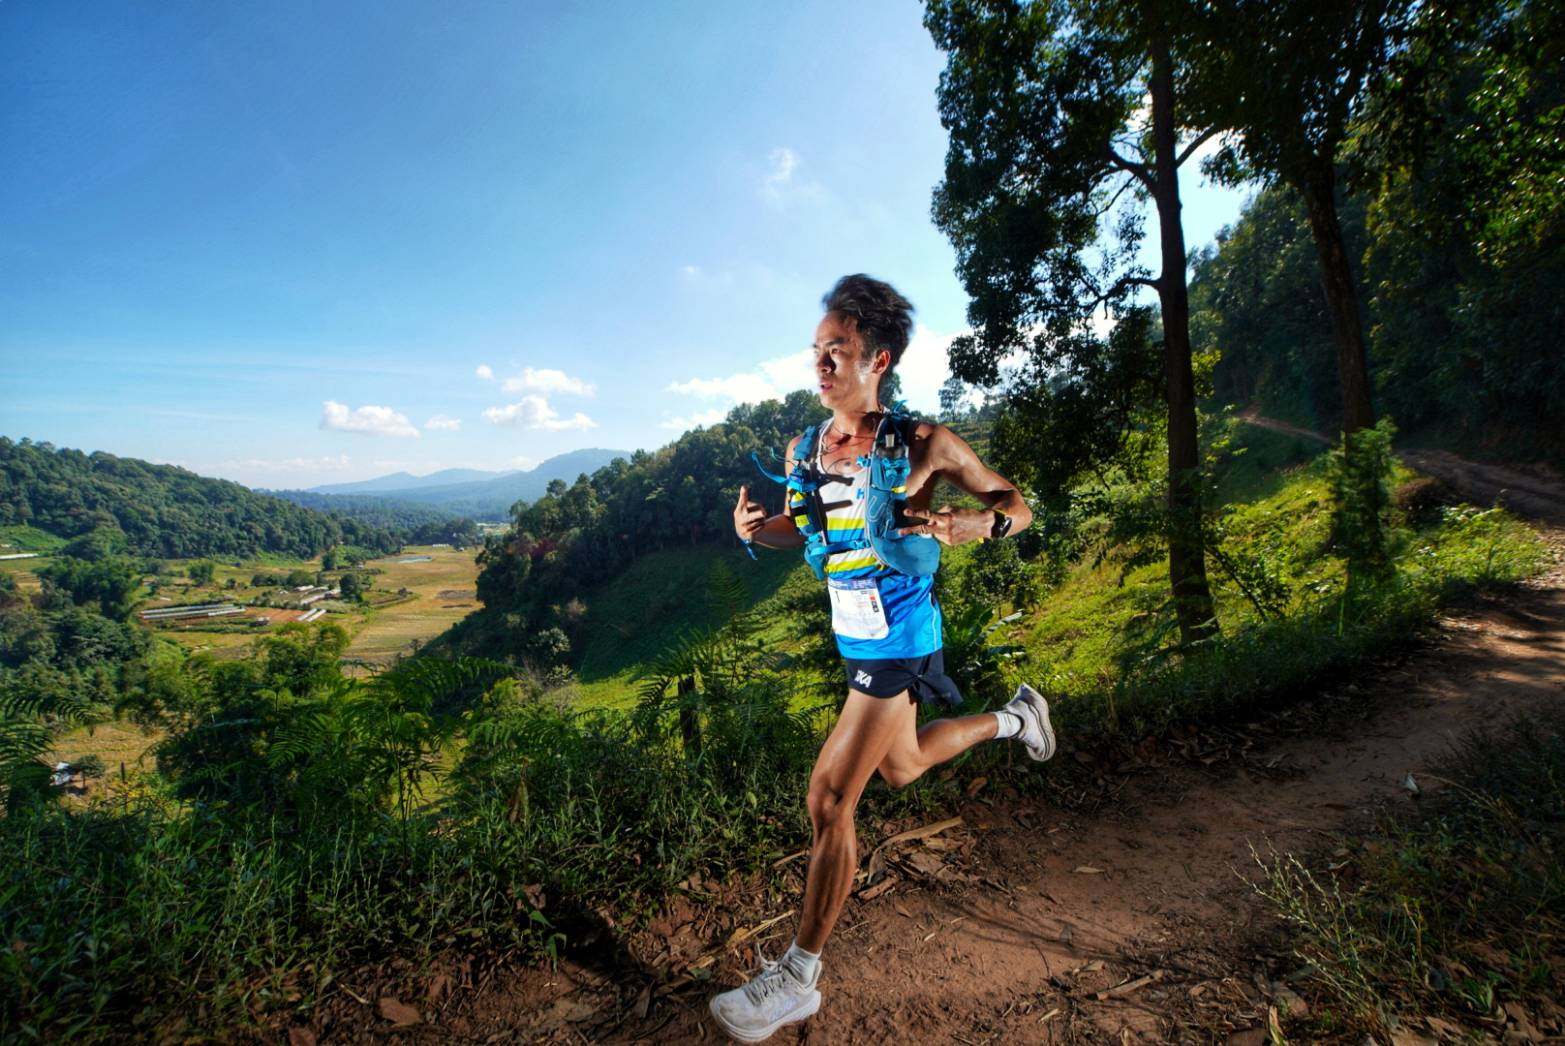 Weight training on your upper and lower body can improve your running. Photo: UTMB